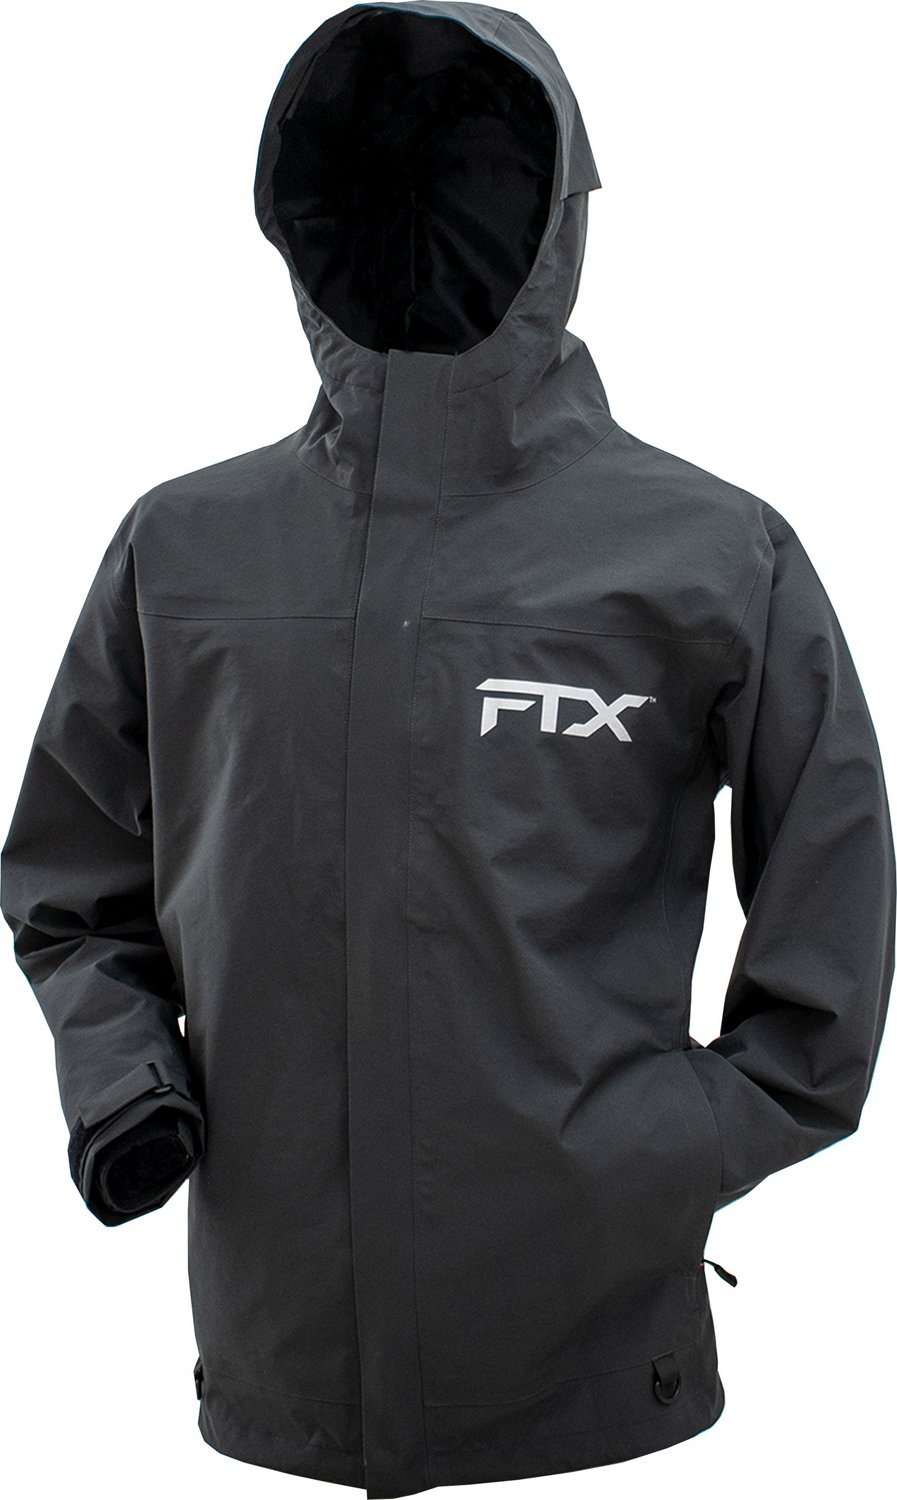 frogg toggs Mens FTX Armor Jacket